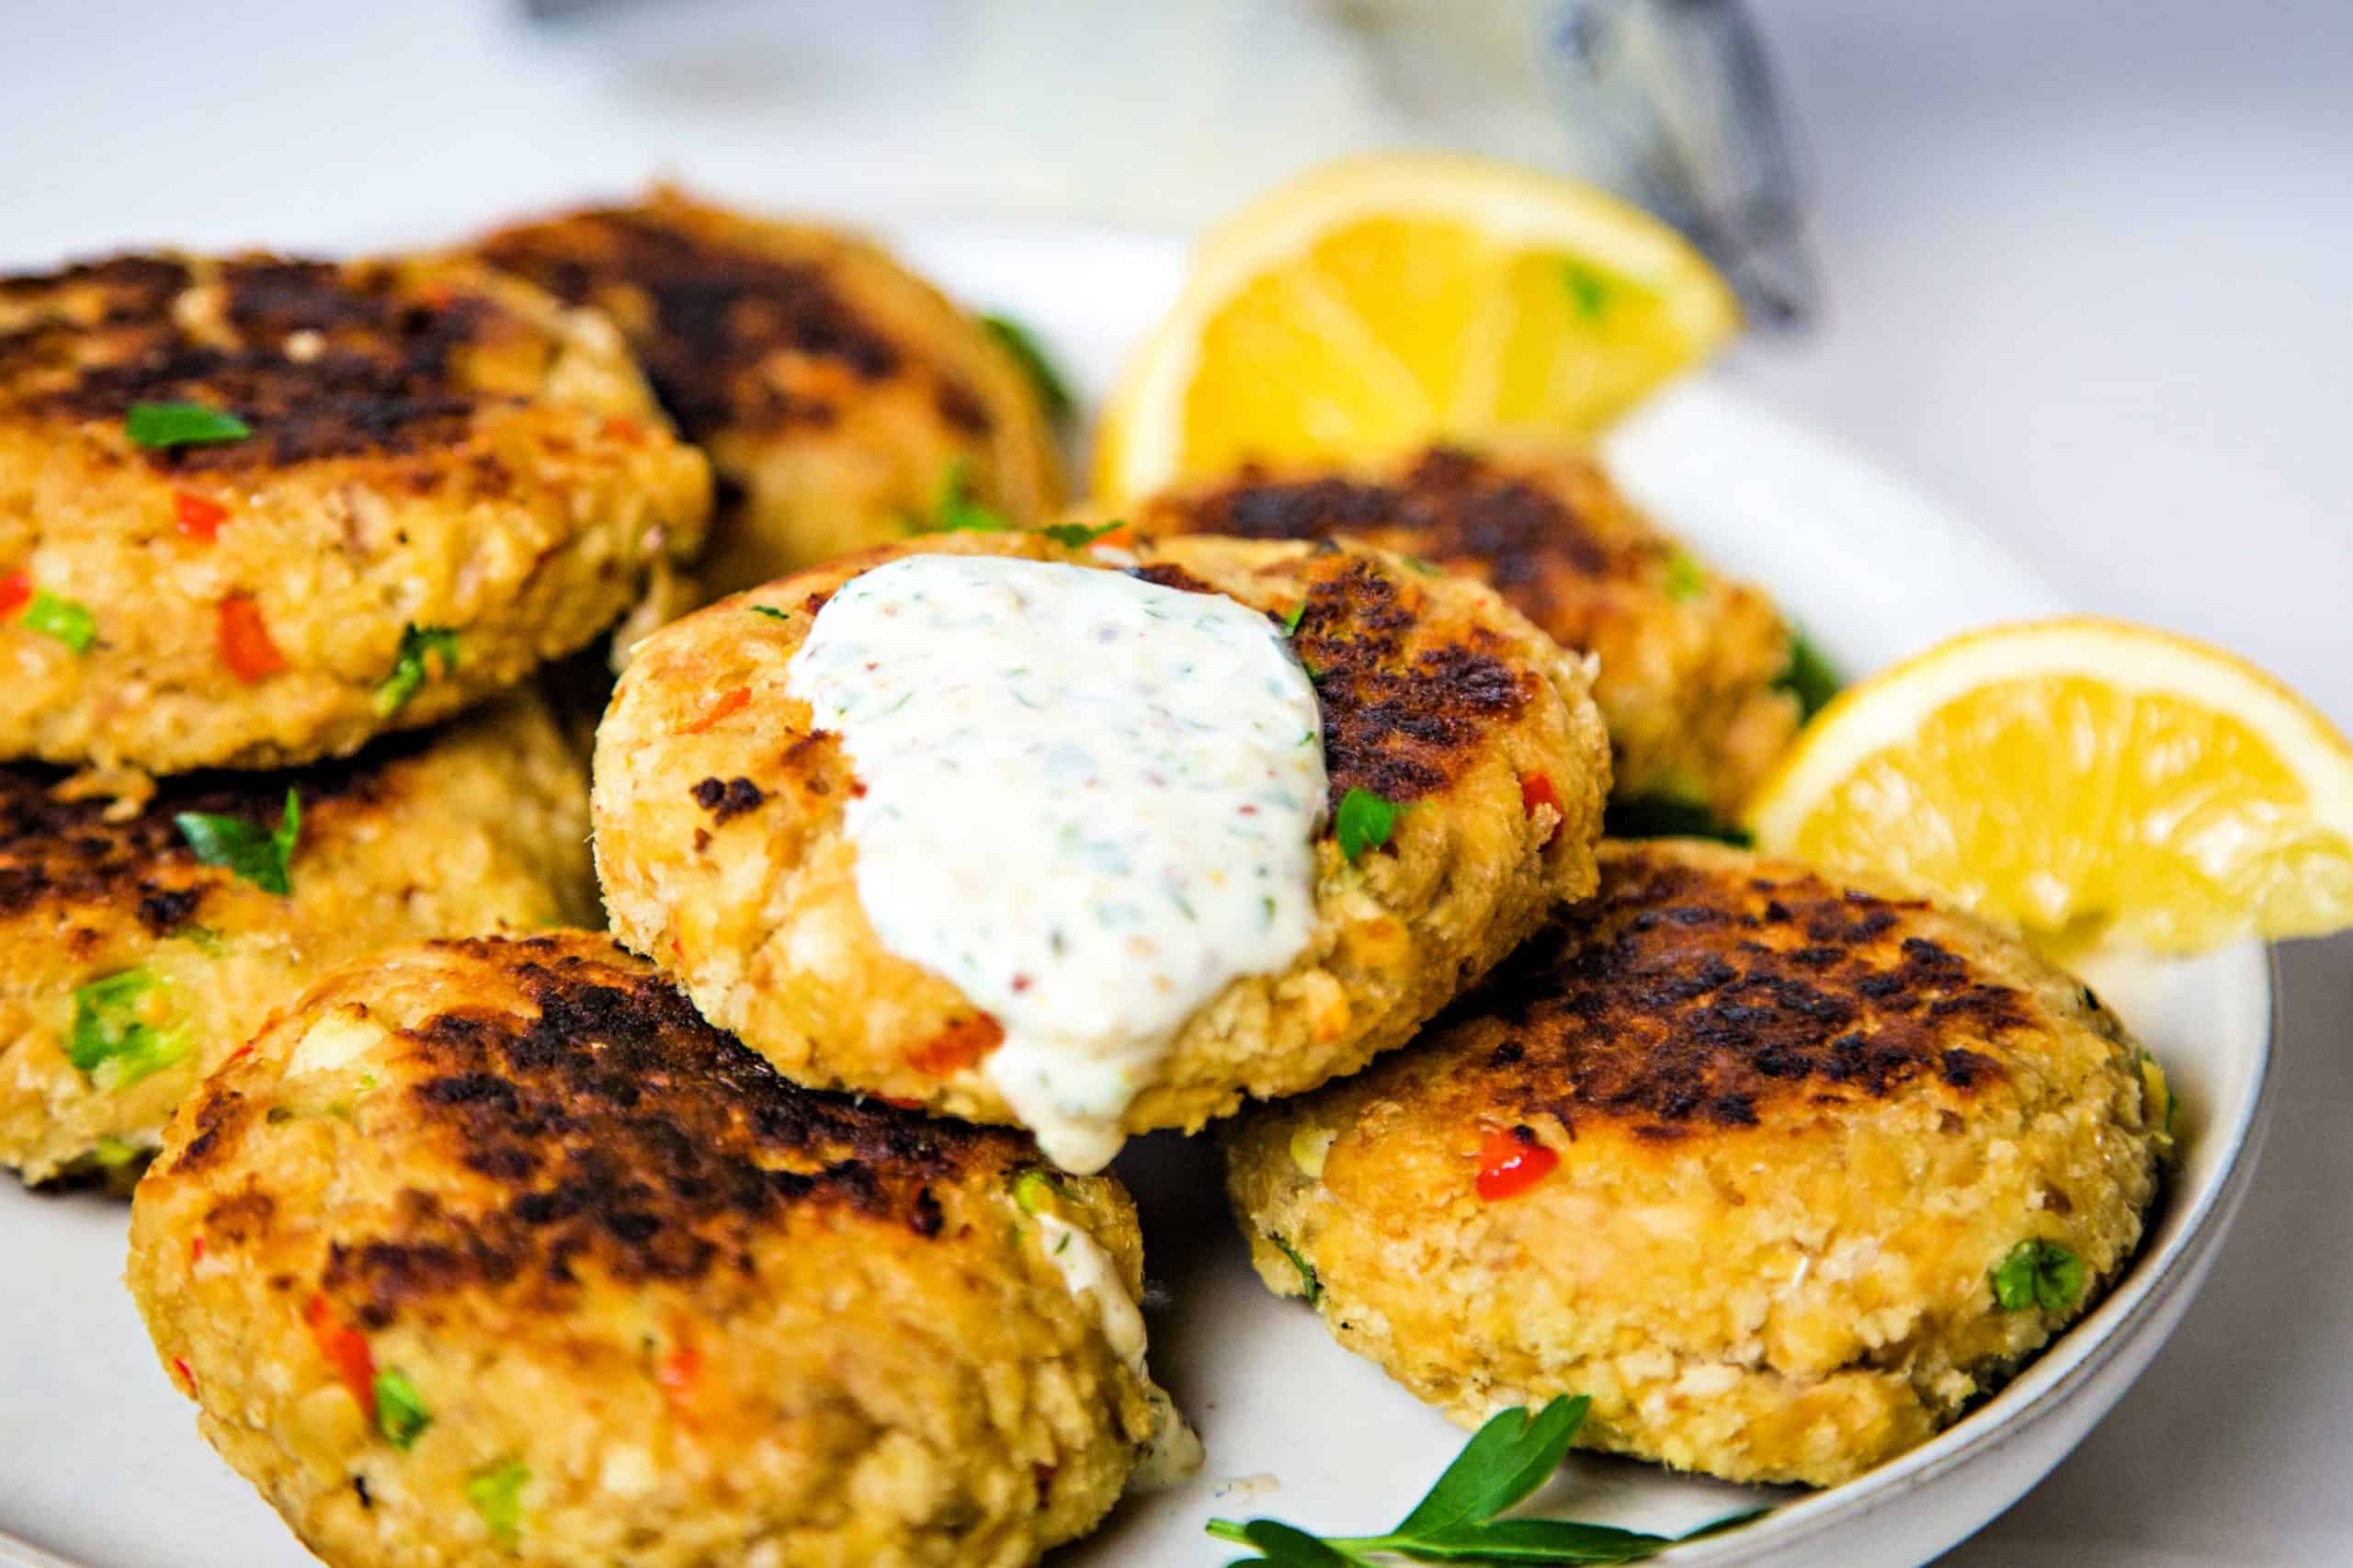 A plate of salmon patties with lemon slices